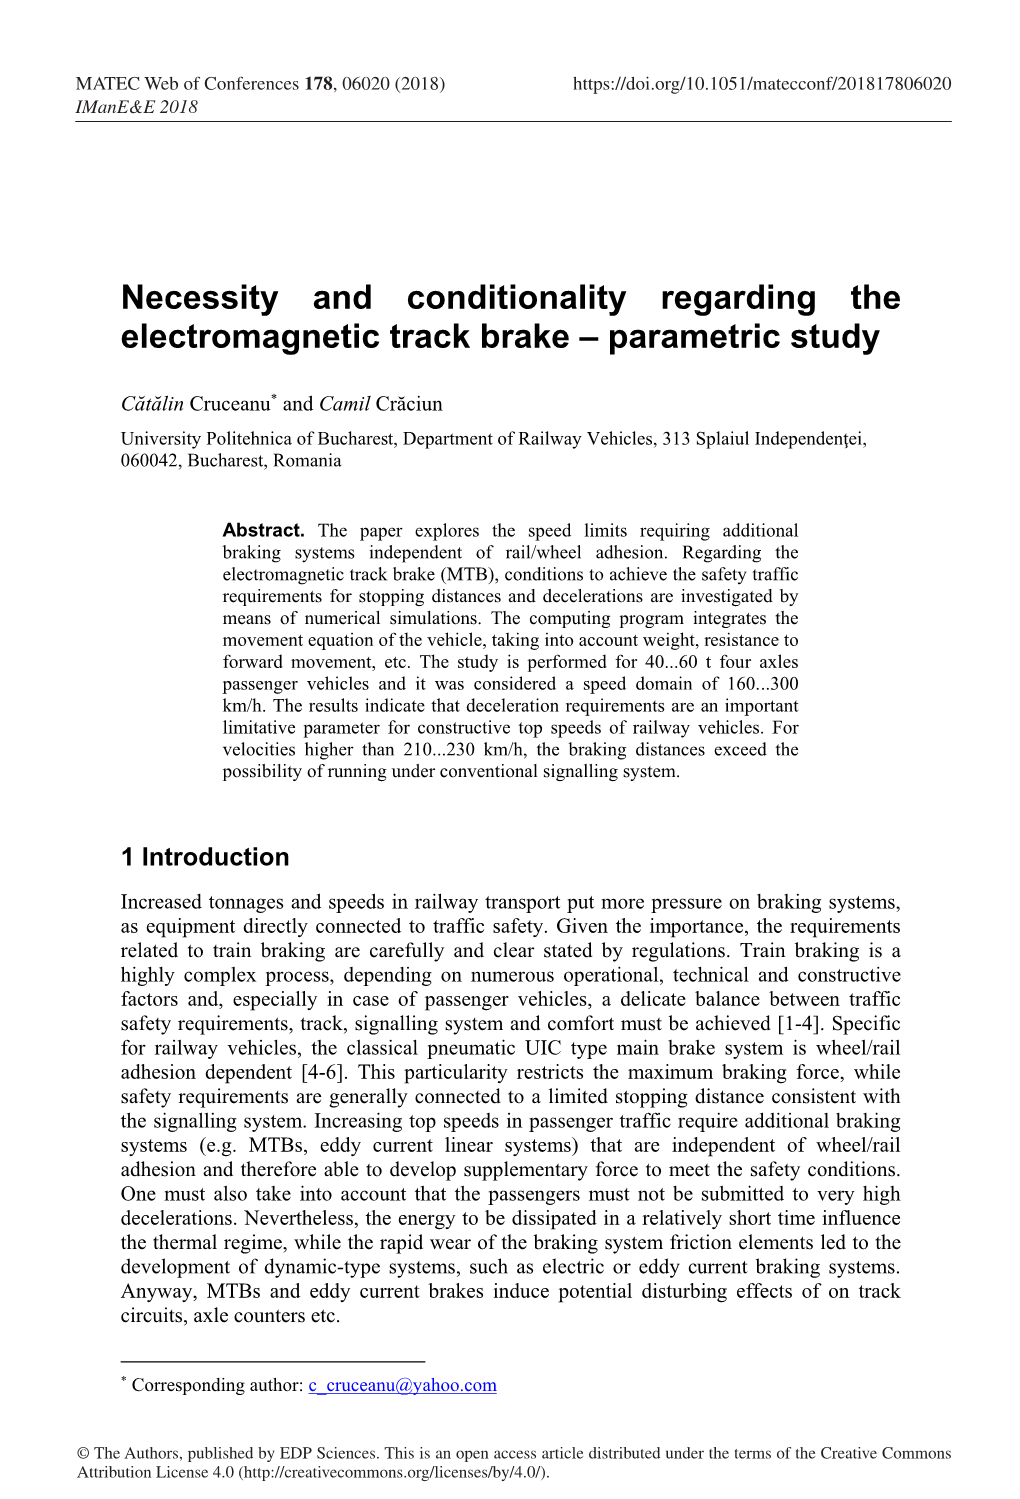 Necessity and Conditionality Regarding the Electromagnetic Track Brake – Parametric Study